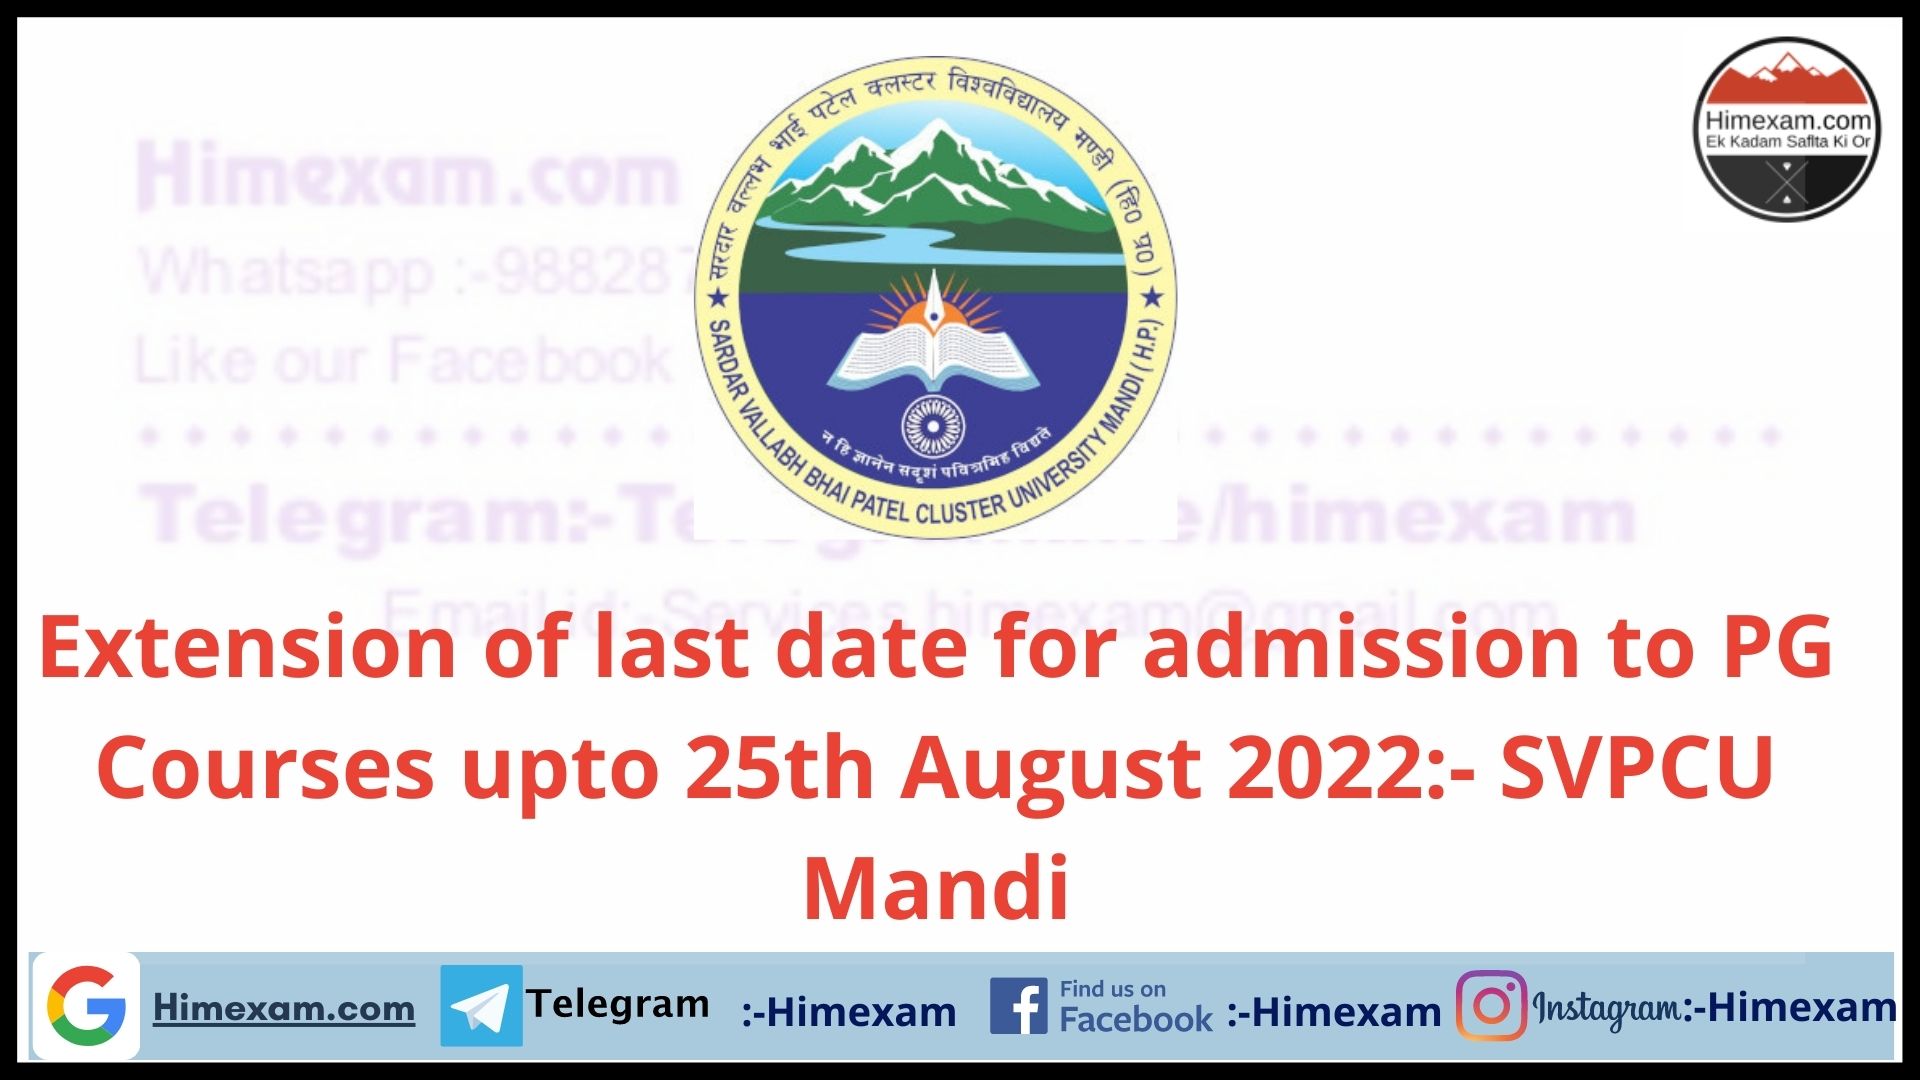 Extension of last date for admission to PG Courses upto 25th August 2022:- SVPCU Mandi